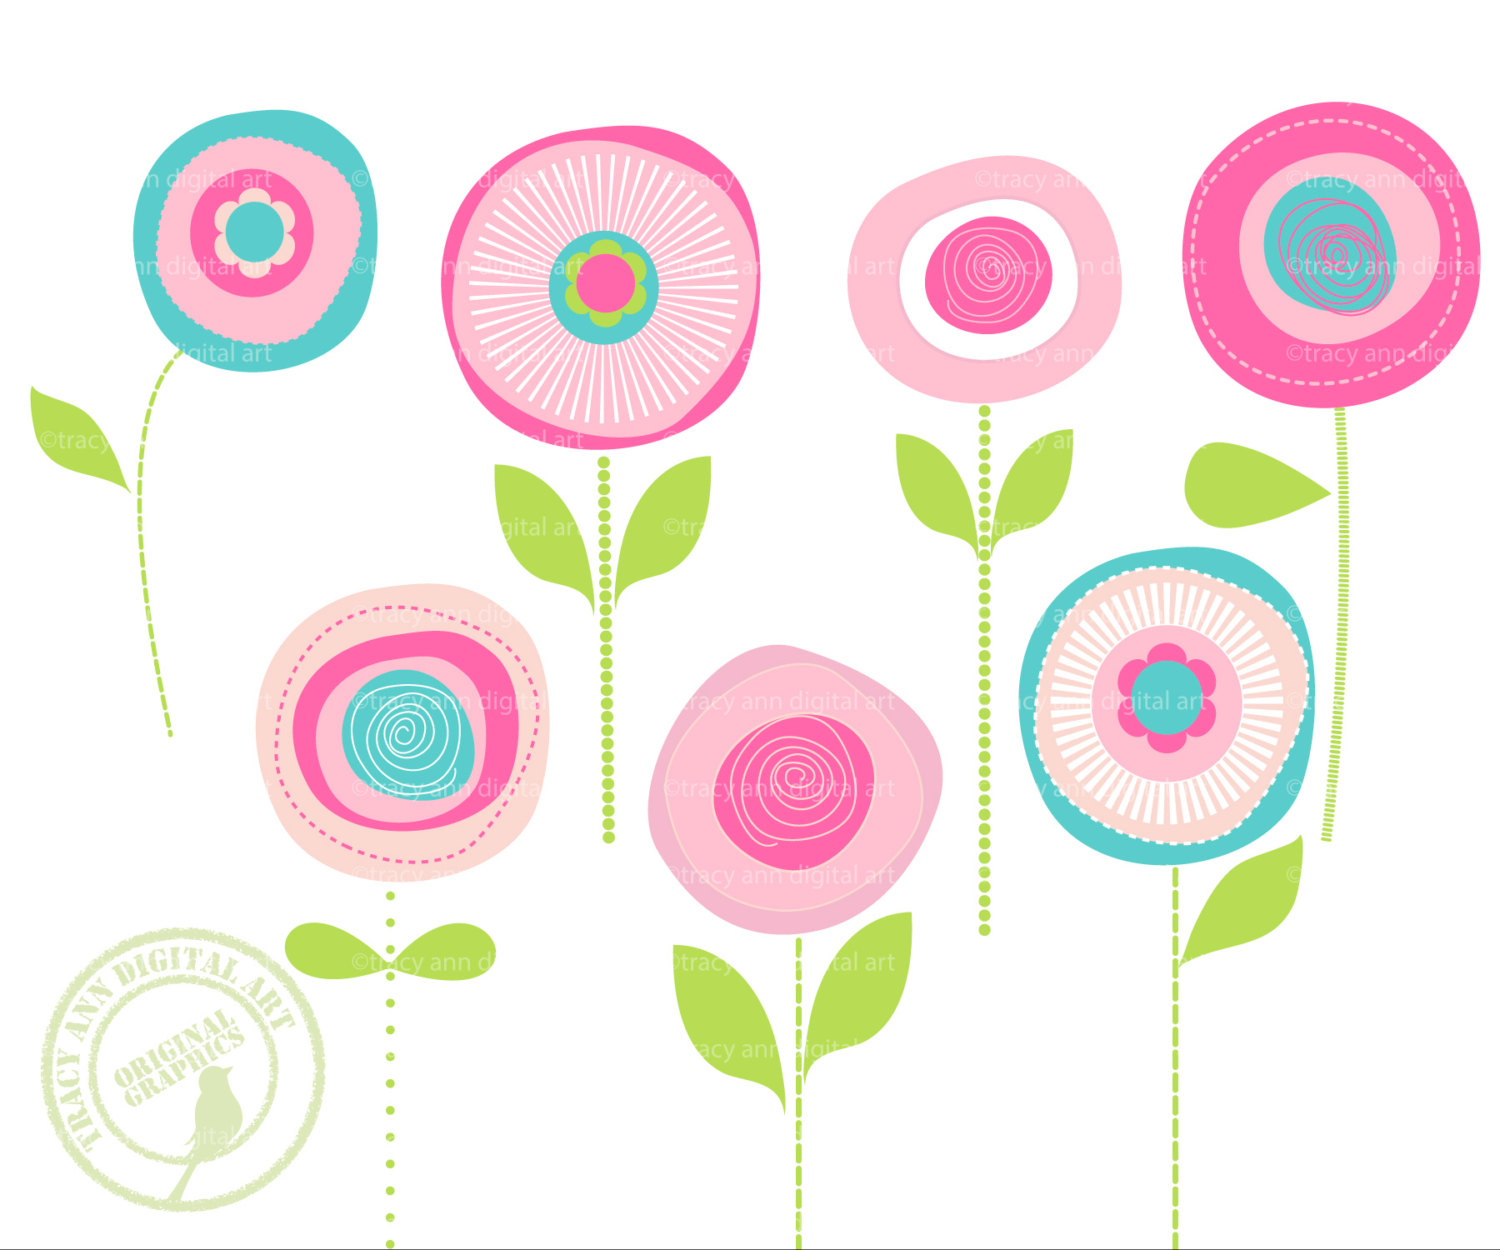 Flowers For > Free Flower Clip Art Images